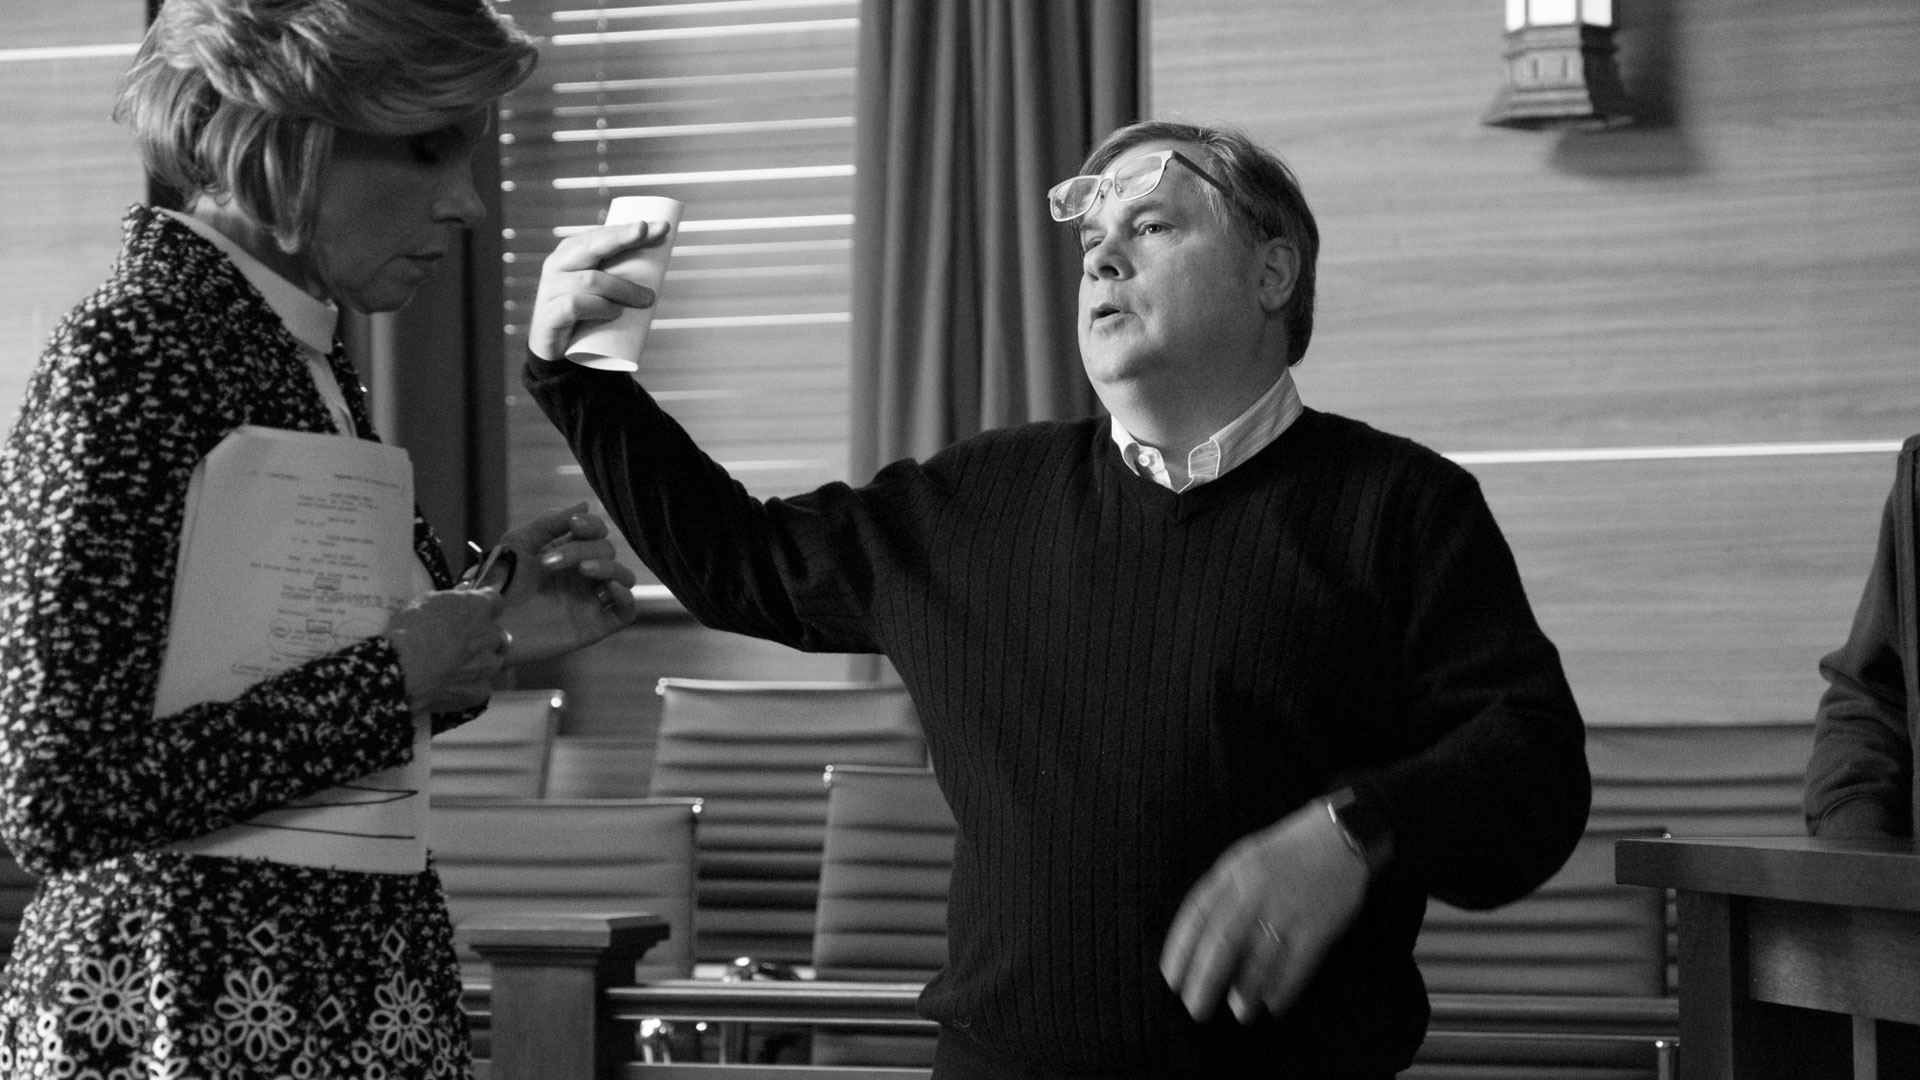 Robert King directs Christine Baranski in the courtroom.